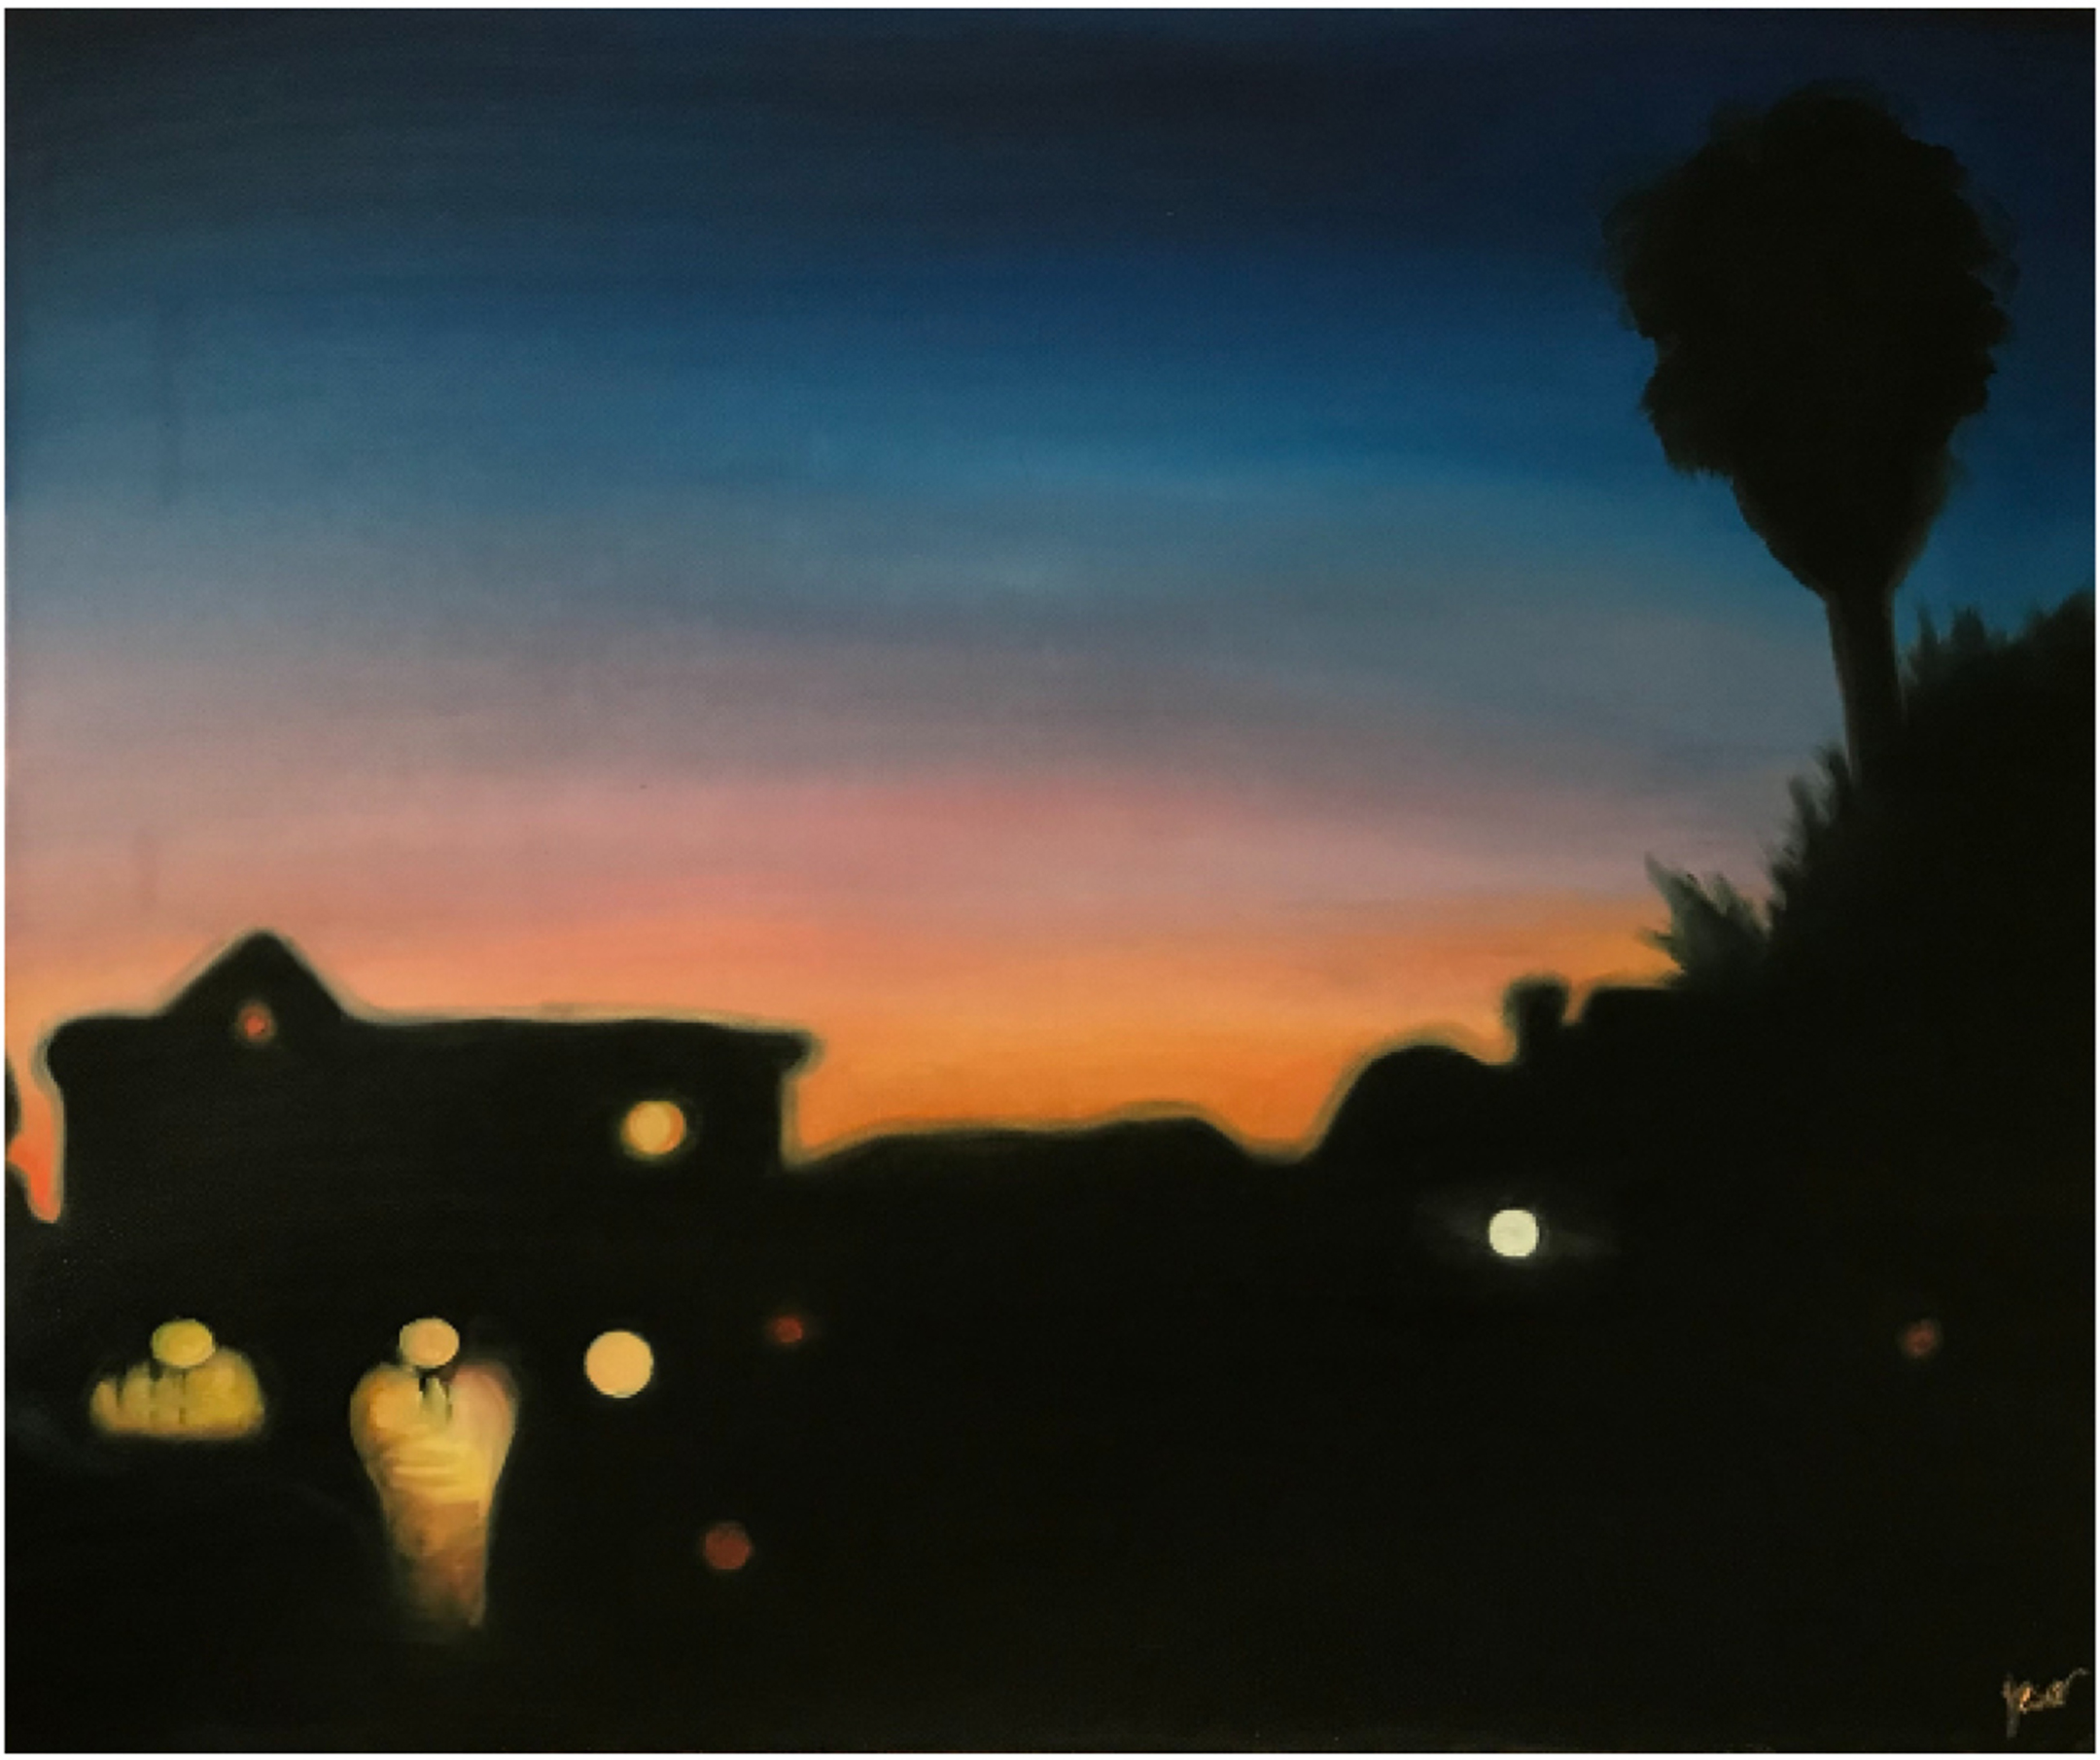 Painting of an out-of-focus sunset with a house and tree in the background